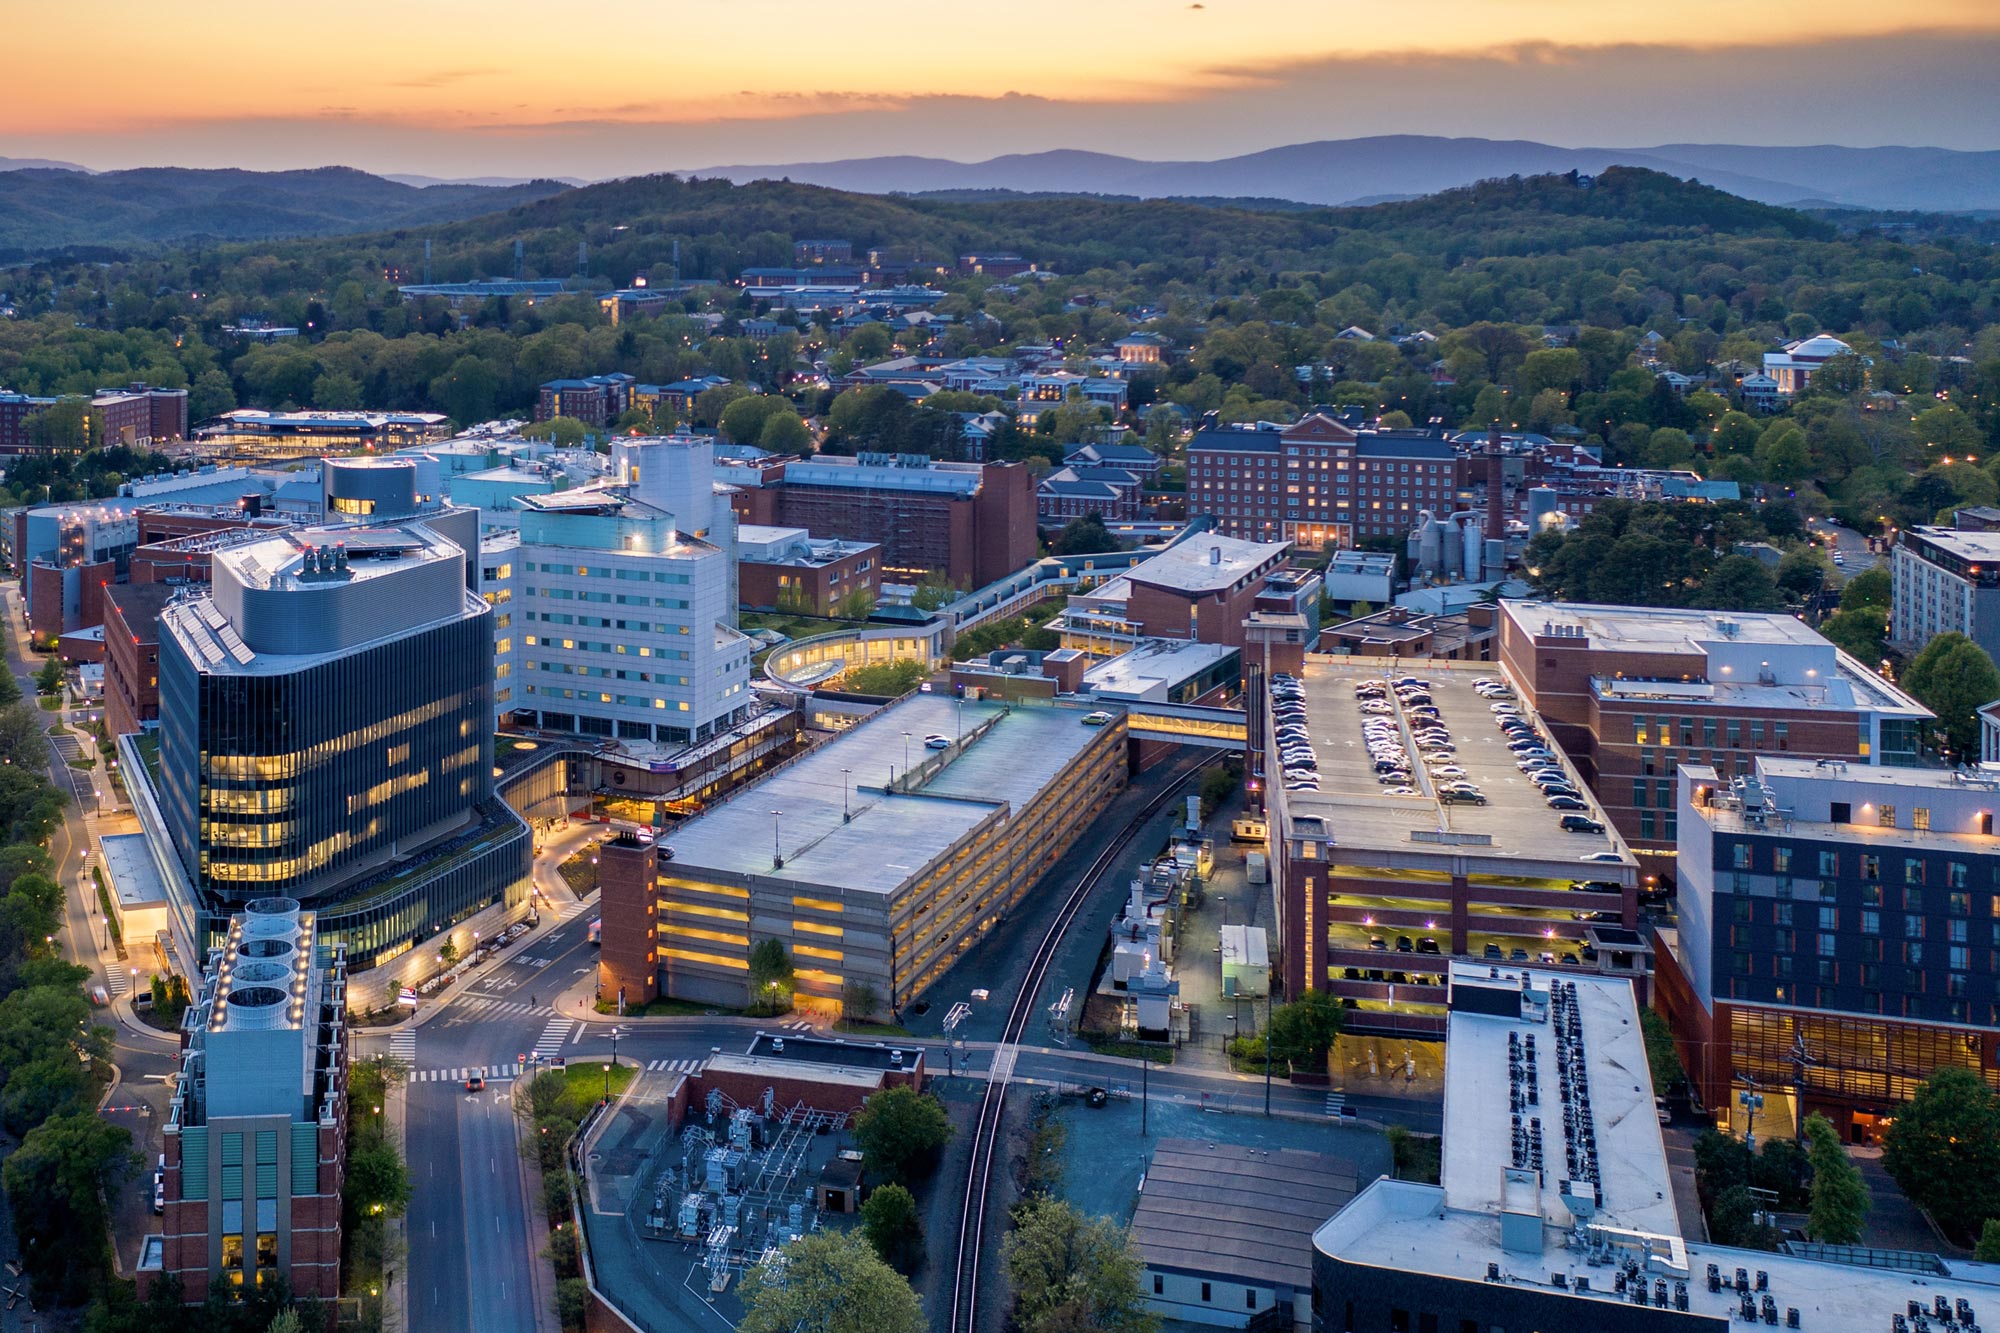 Aerial view of the UVA Health system with the Rotunda and the rest of Grounds visible in the distance